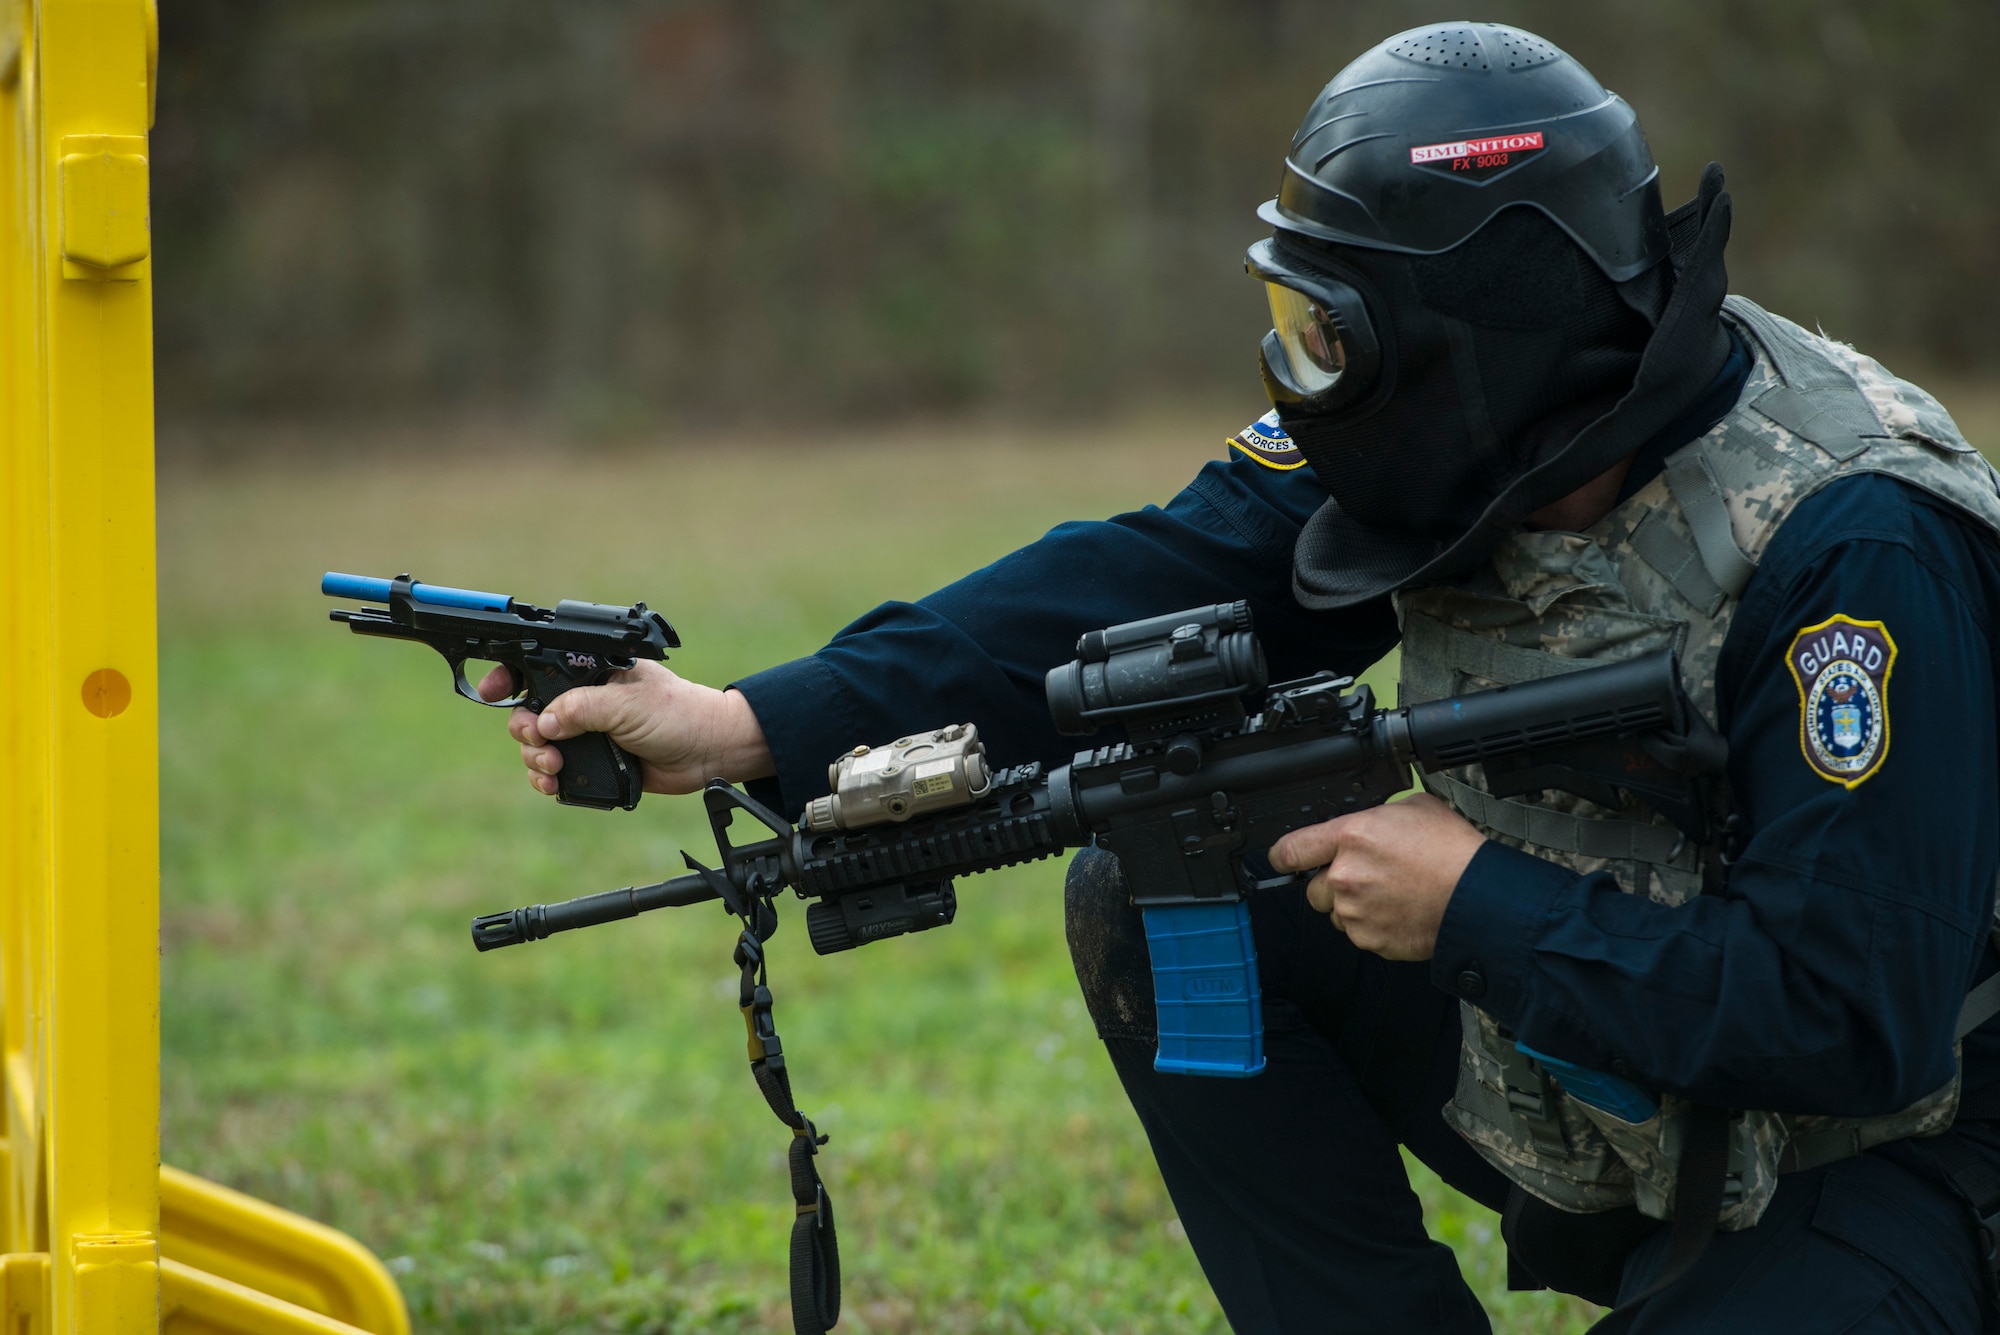 A contractor from the 23d Security Forces Squadron empties a clip during a training event, Feb. 22, 2018, at Moody Air Force Base, Ga. “Shoot, move, communicate” is a training event that tests participants on their ability to move from barricade to barricade as a team. While one member provided covering fire the others advanced on the enemy, then retreated from the scenario while they maintained cover fire. Security Forces members would employ these tactics anytime they’re under enemy fire. (U.S. Air Force photo by Senior Airman Janiqua P. Robinson)